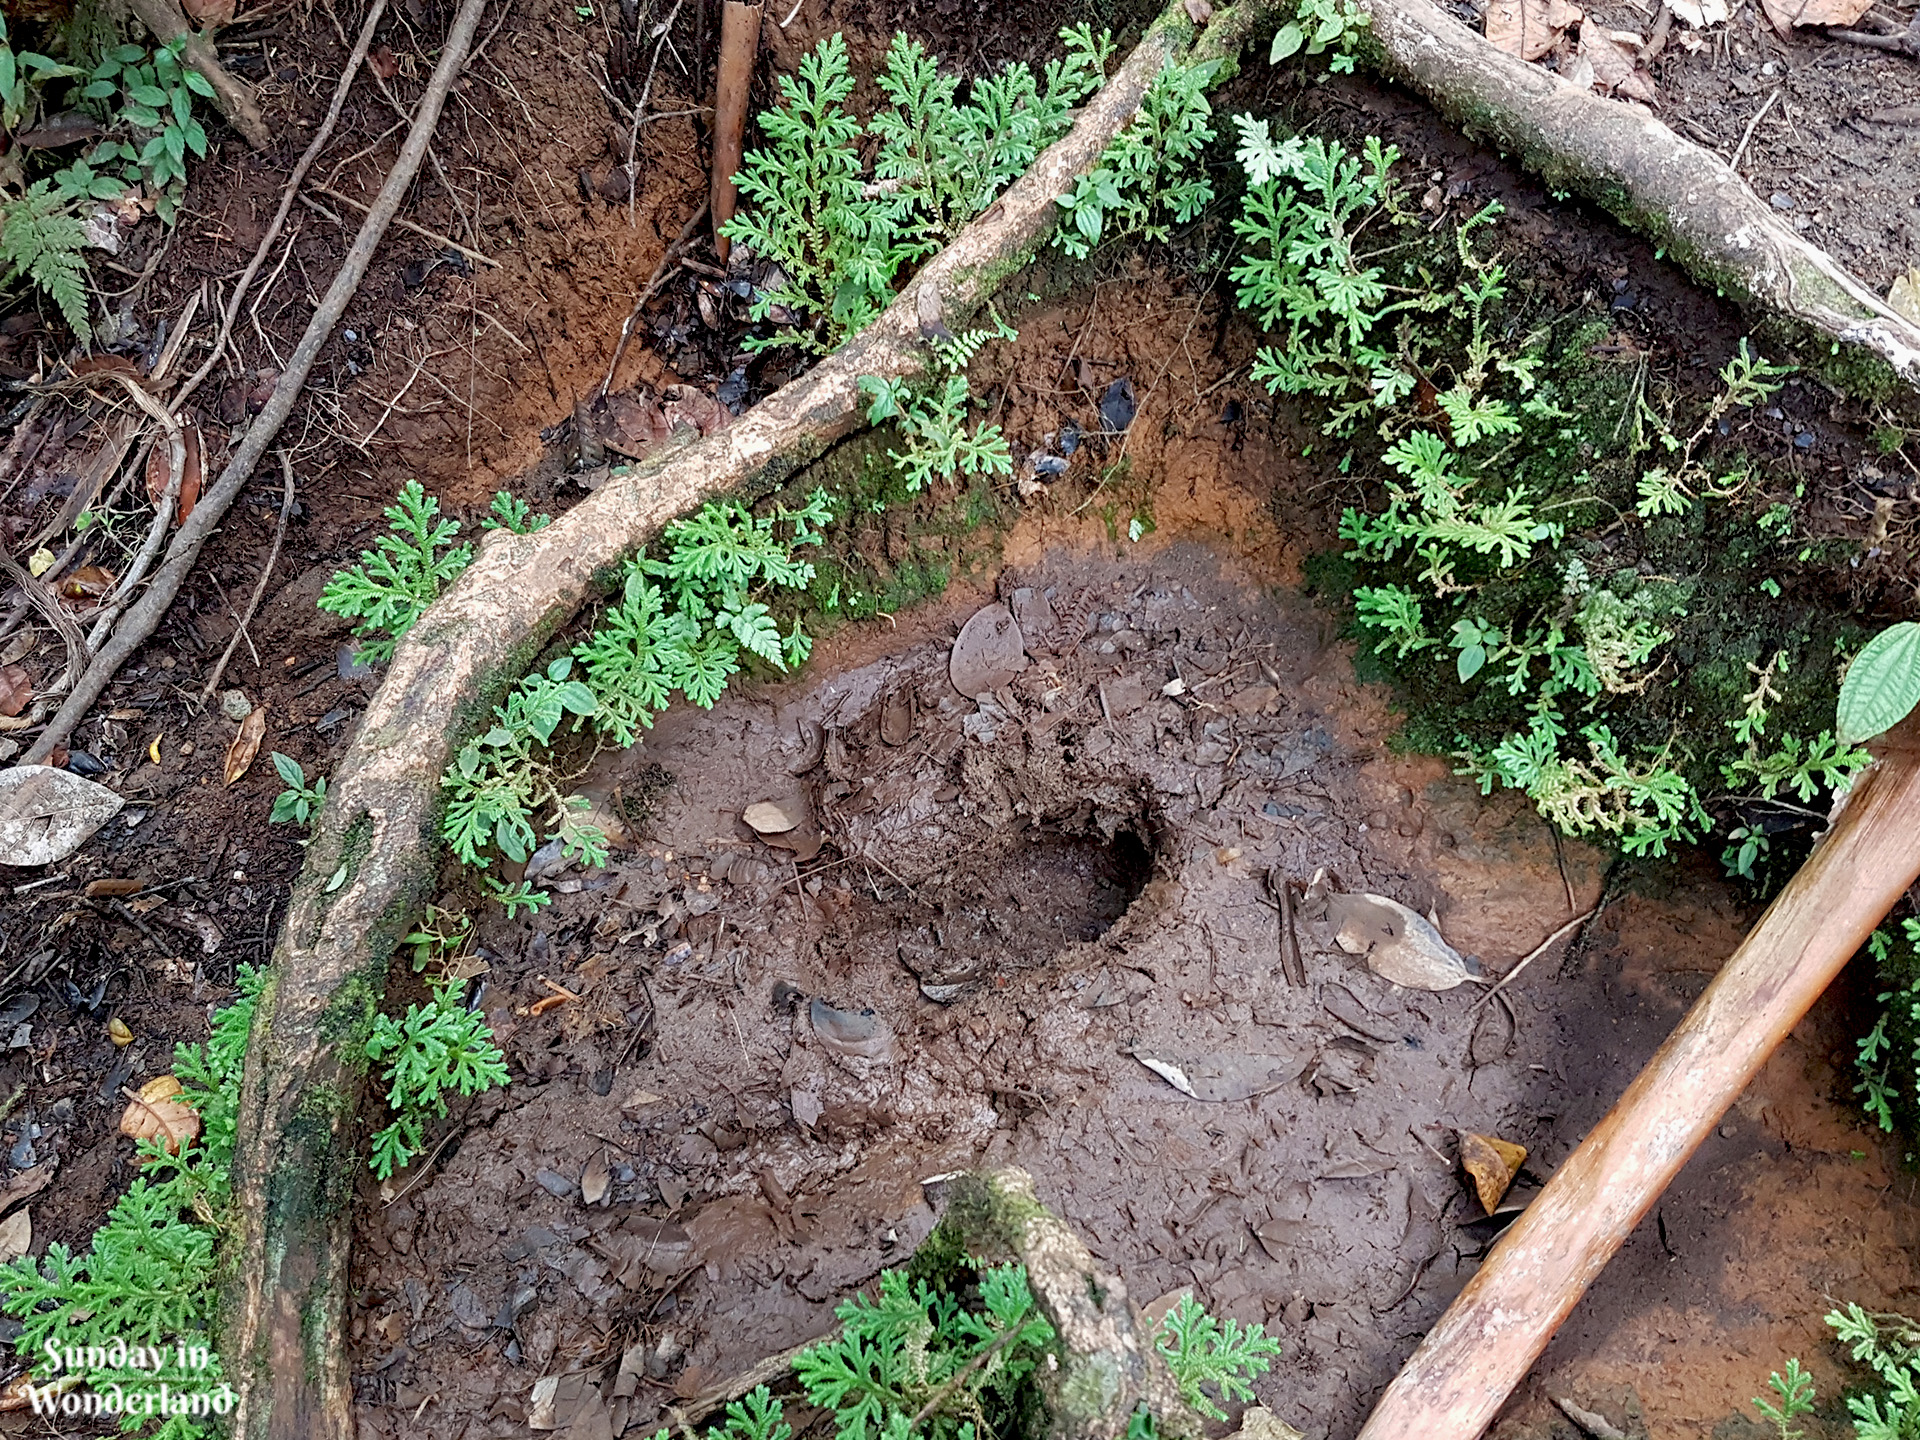 Human footprint on the path to La Citerne - Guadeloupe - Sunday in Wonderland Blog